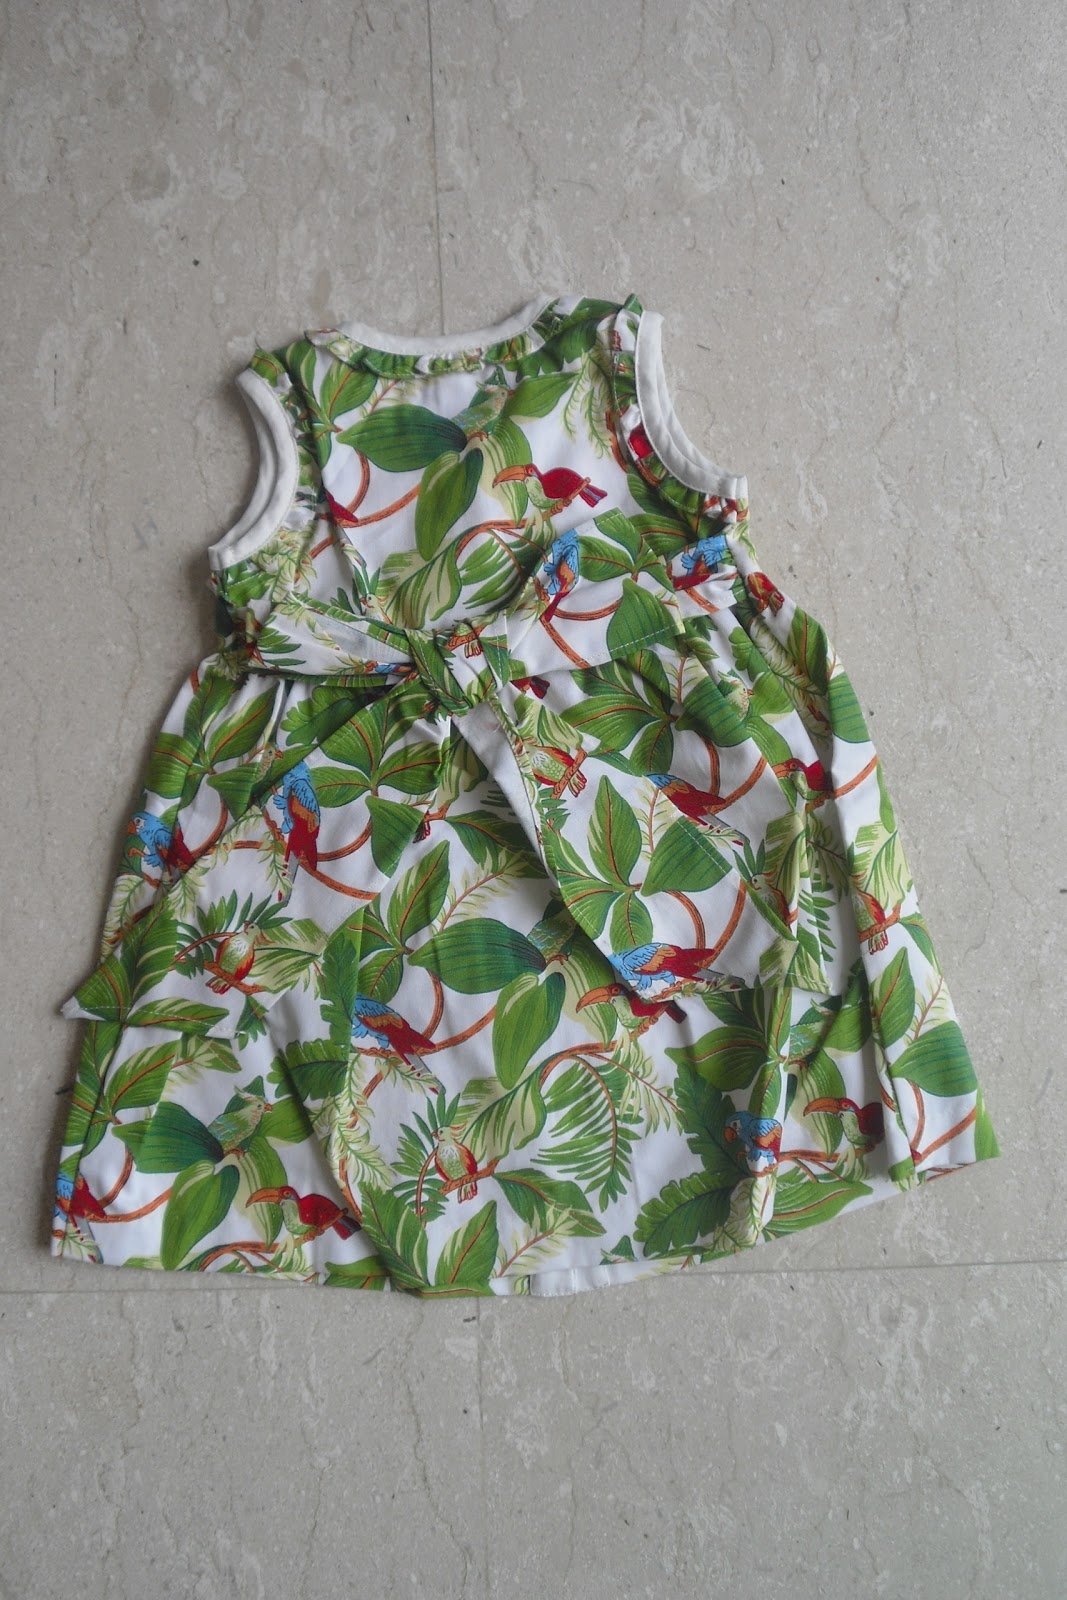 My Baby's First Clothes: Petite Cigogne - A tropical dress for my baby ...